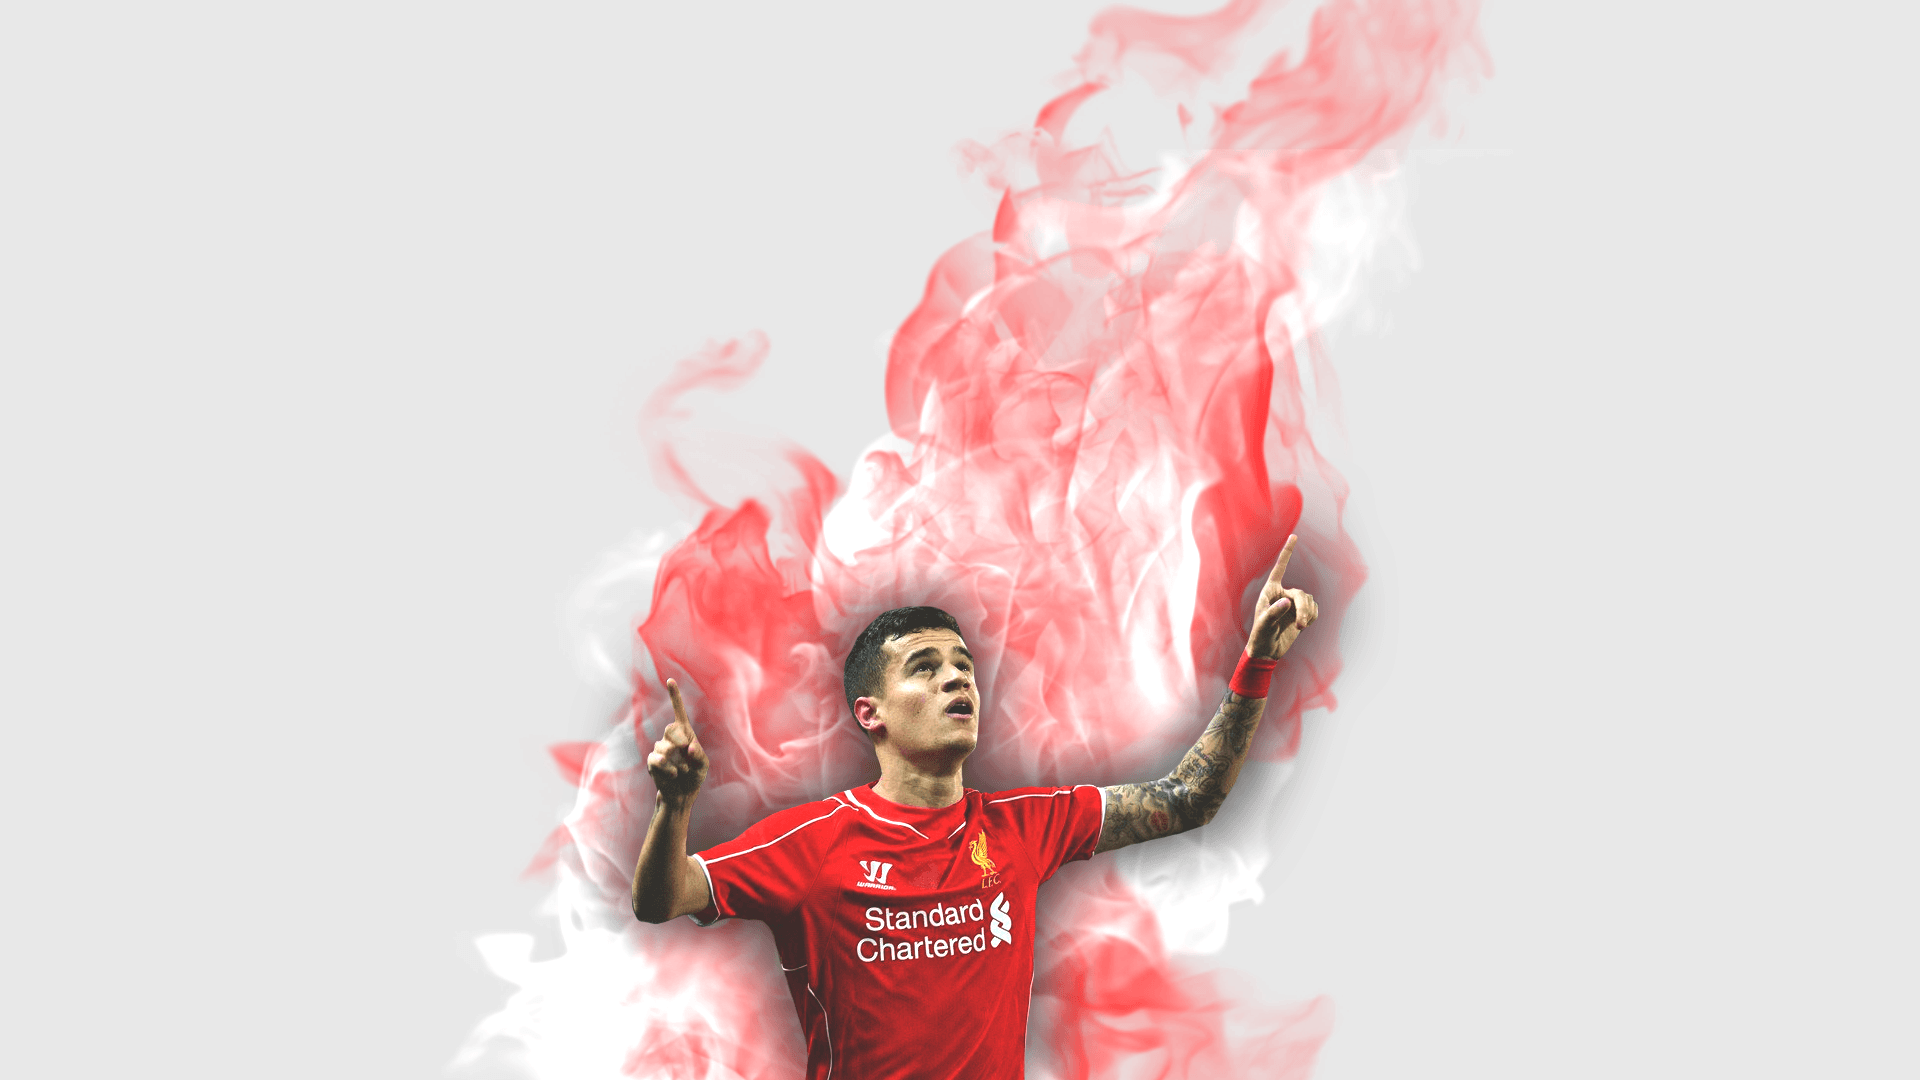 Made a Coutinho wallpaper if anyone is interested. 1920x1080